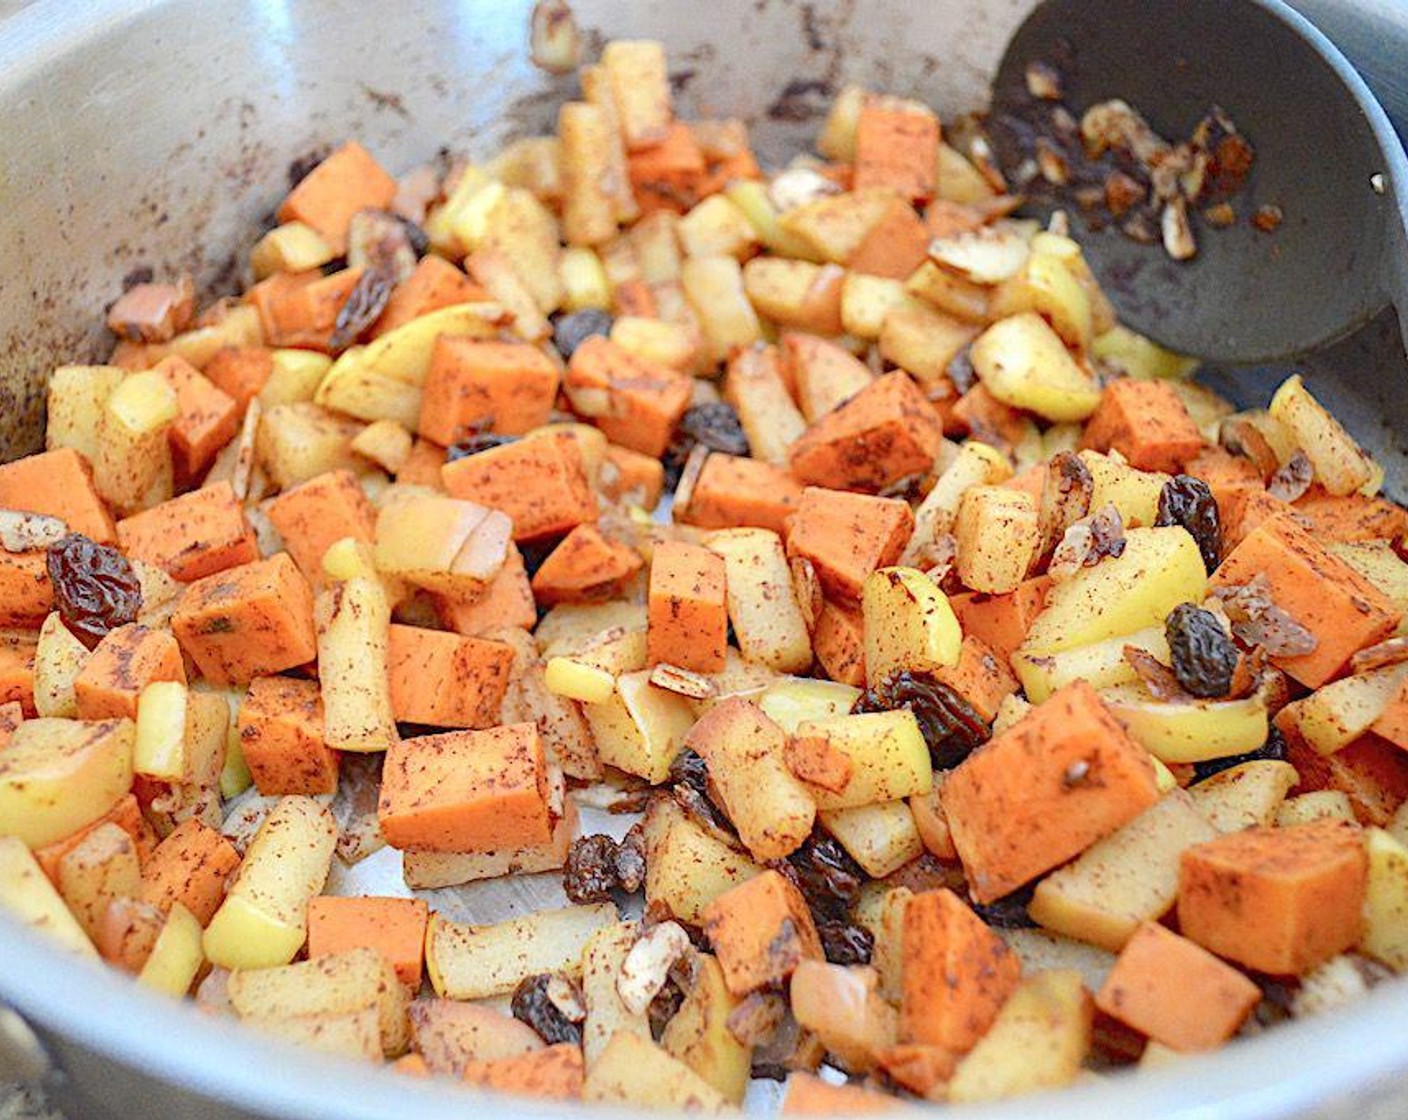 step 2 Heat the Coconut Oil (1 Tbsp) in a large skillet with deep sides. Add the Sweet Potatoes (2), Apples (2), Ground Cinnamon (1 tsp), and Ground Ginger (1/4 tsp) and let them soften to become really fragrant for 5 minutes or so.